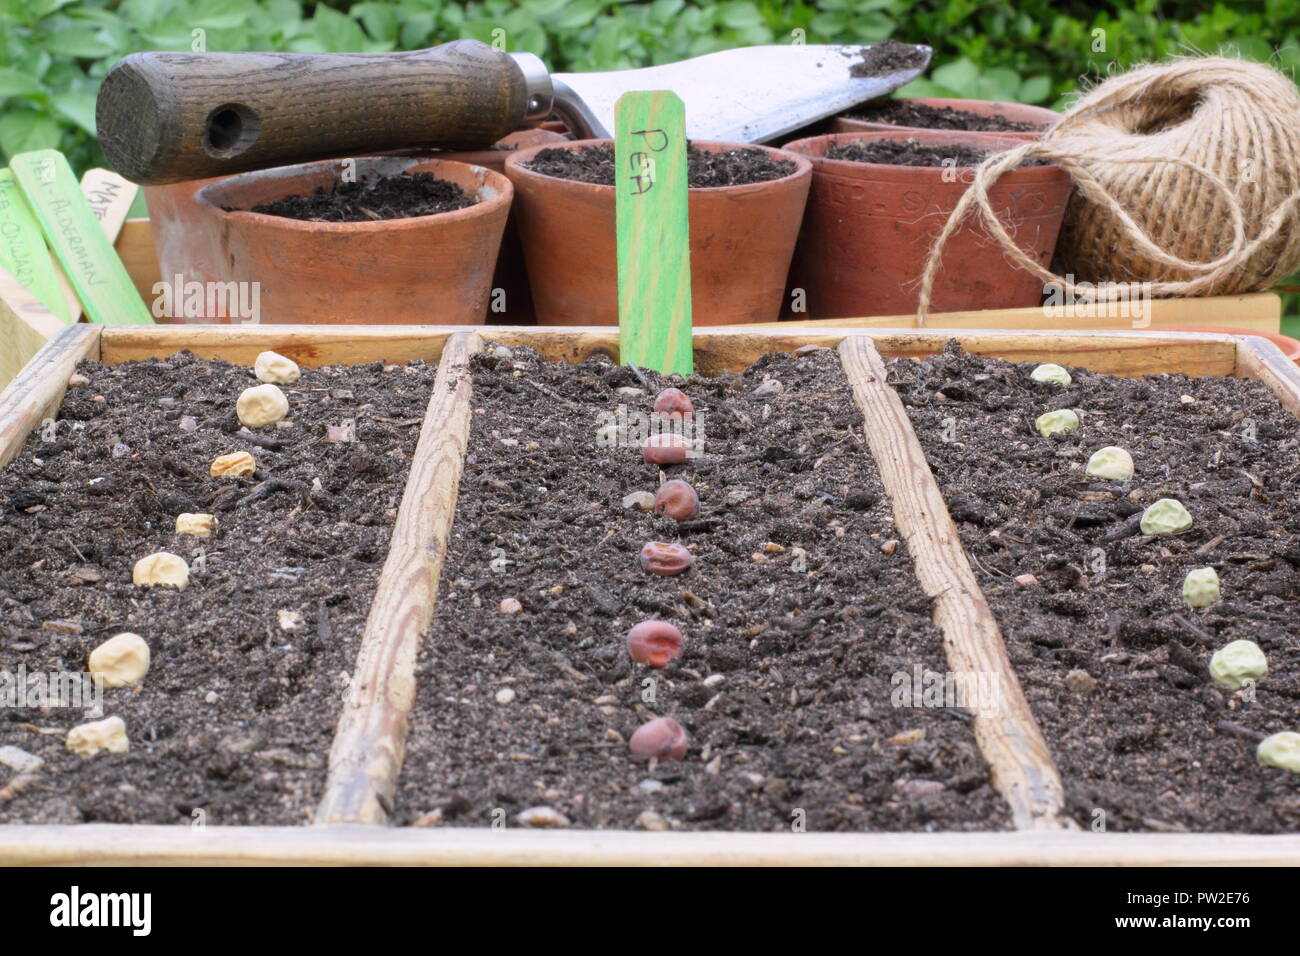 Pisum sativum. Sowing pea seeds 'Onward', Shiraz' and 'Alderman' in wooden tray to start the plants off under cover, UK Stock Photo